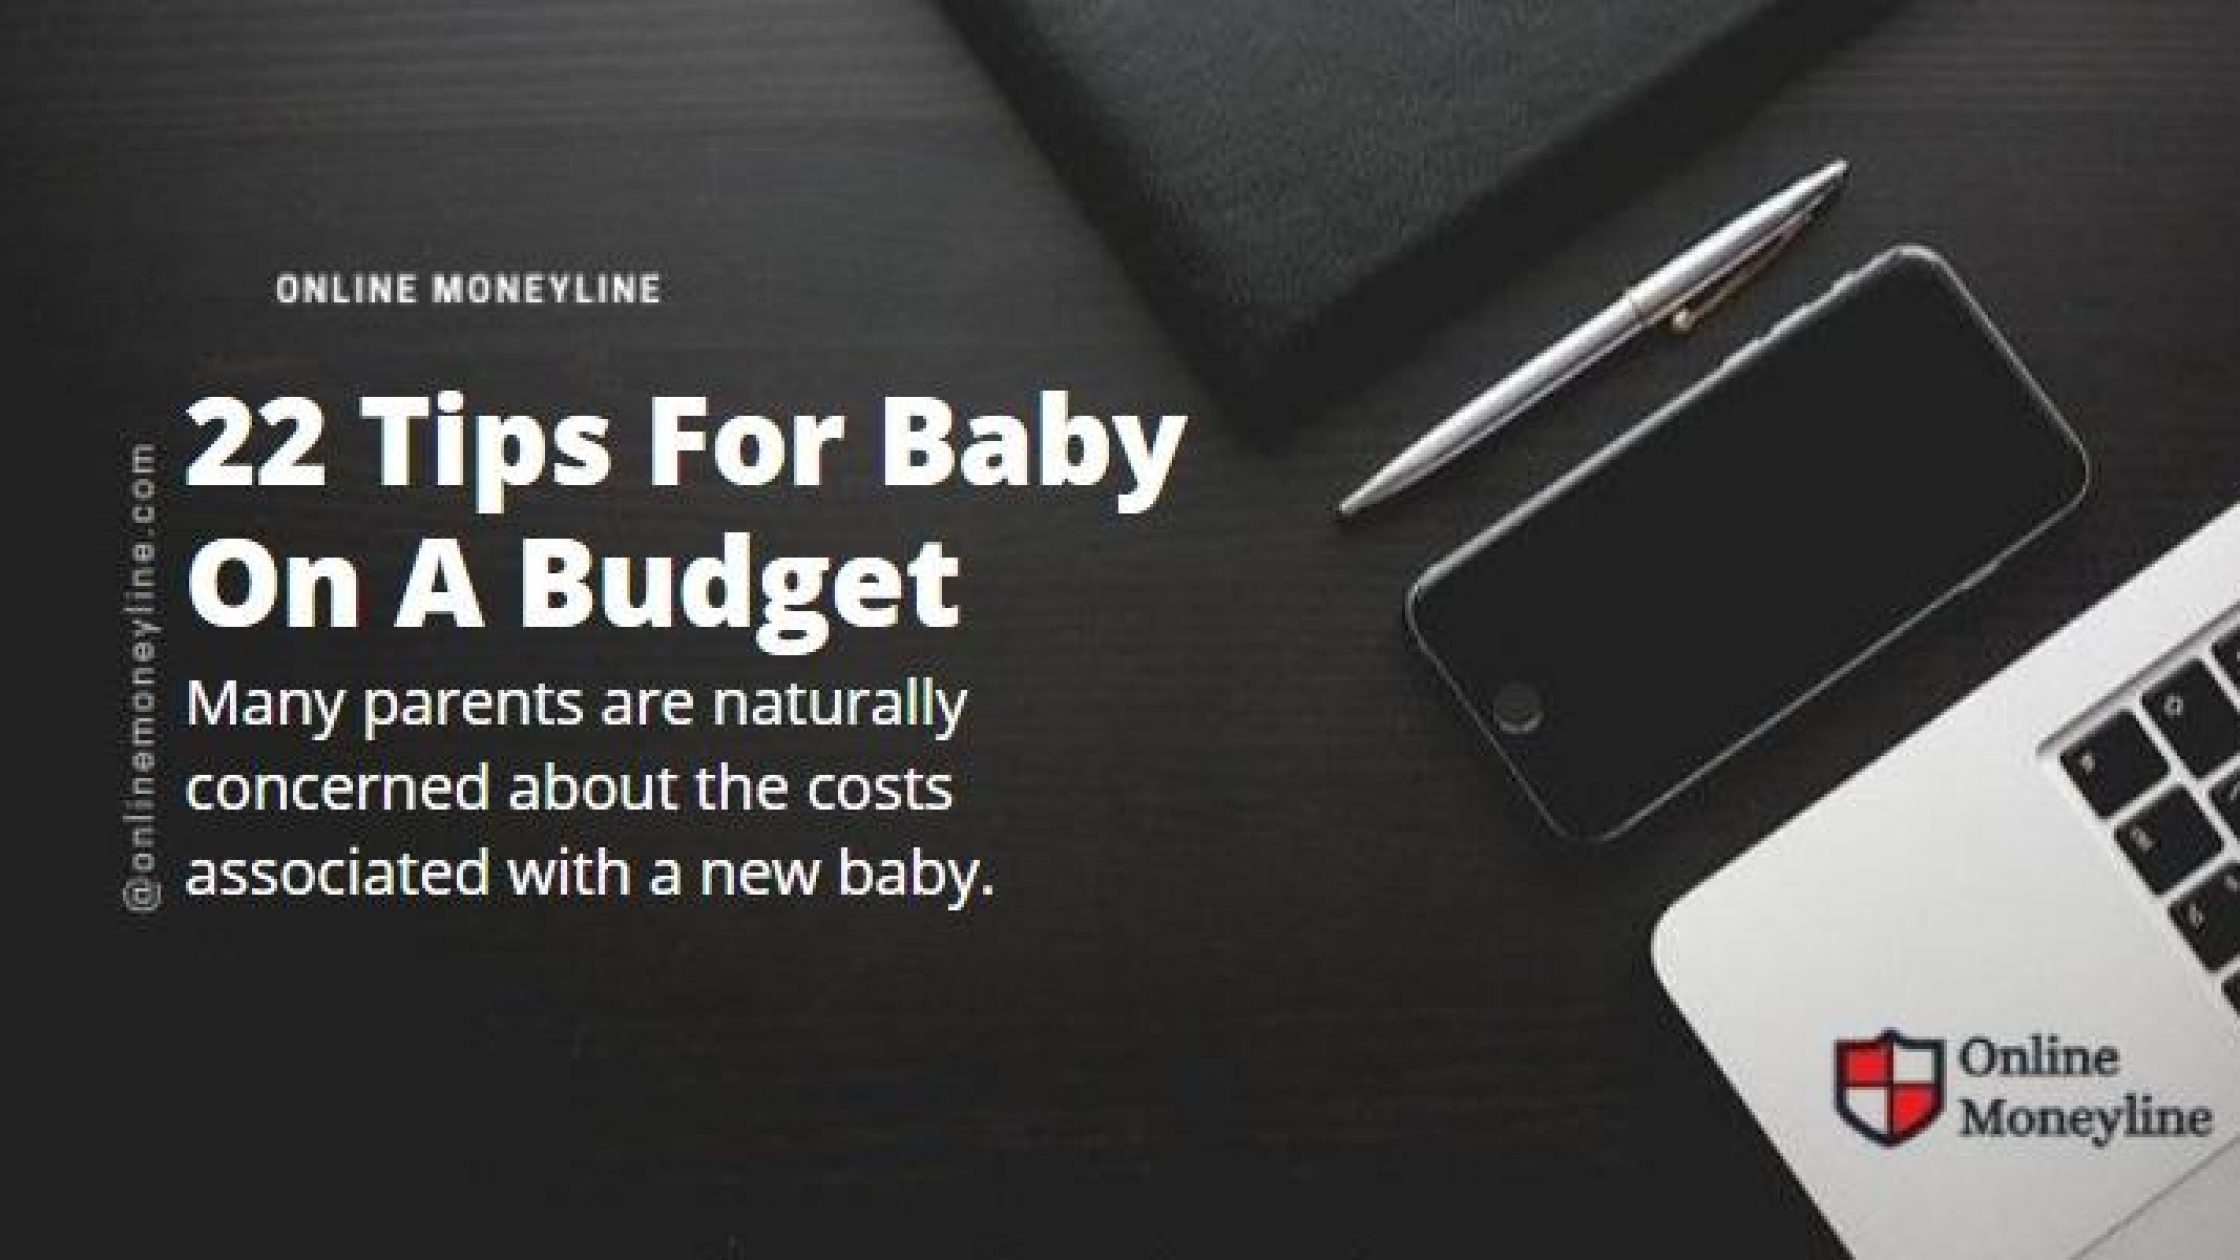 22 Tips For Baby On A Budget: 4 Tables Exact Price Mention